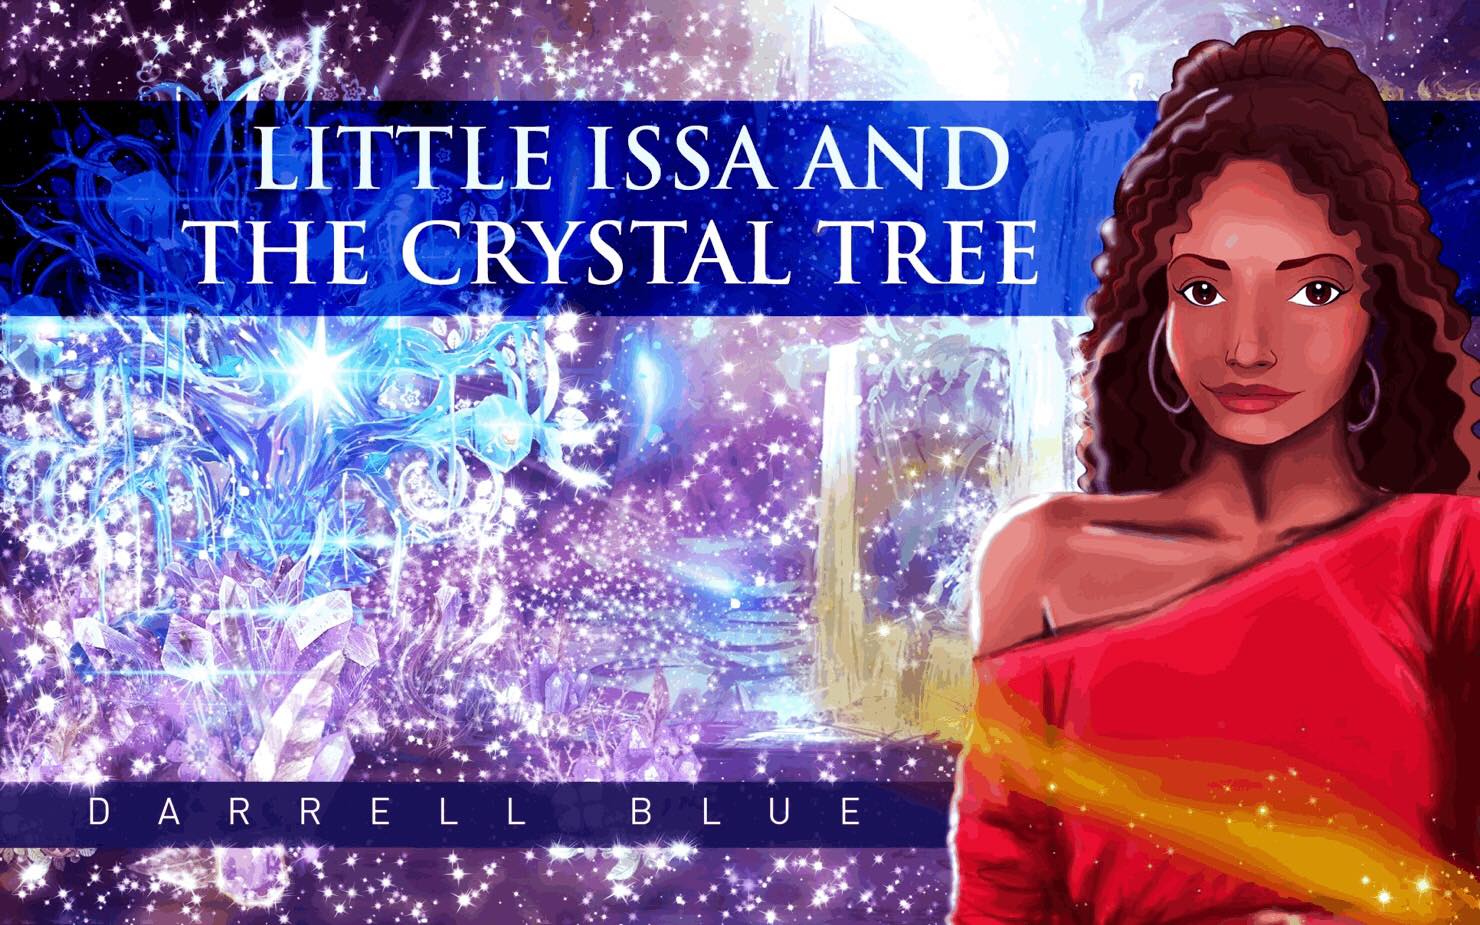 Paint the World Project presents "Little Issa and the Crystal Tree"